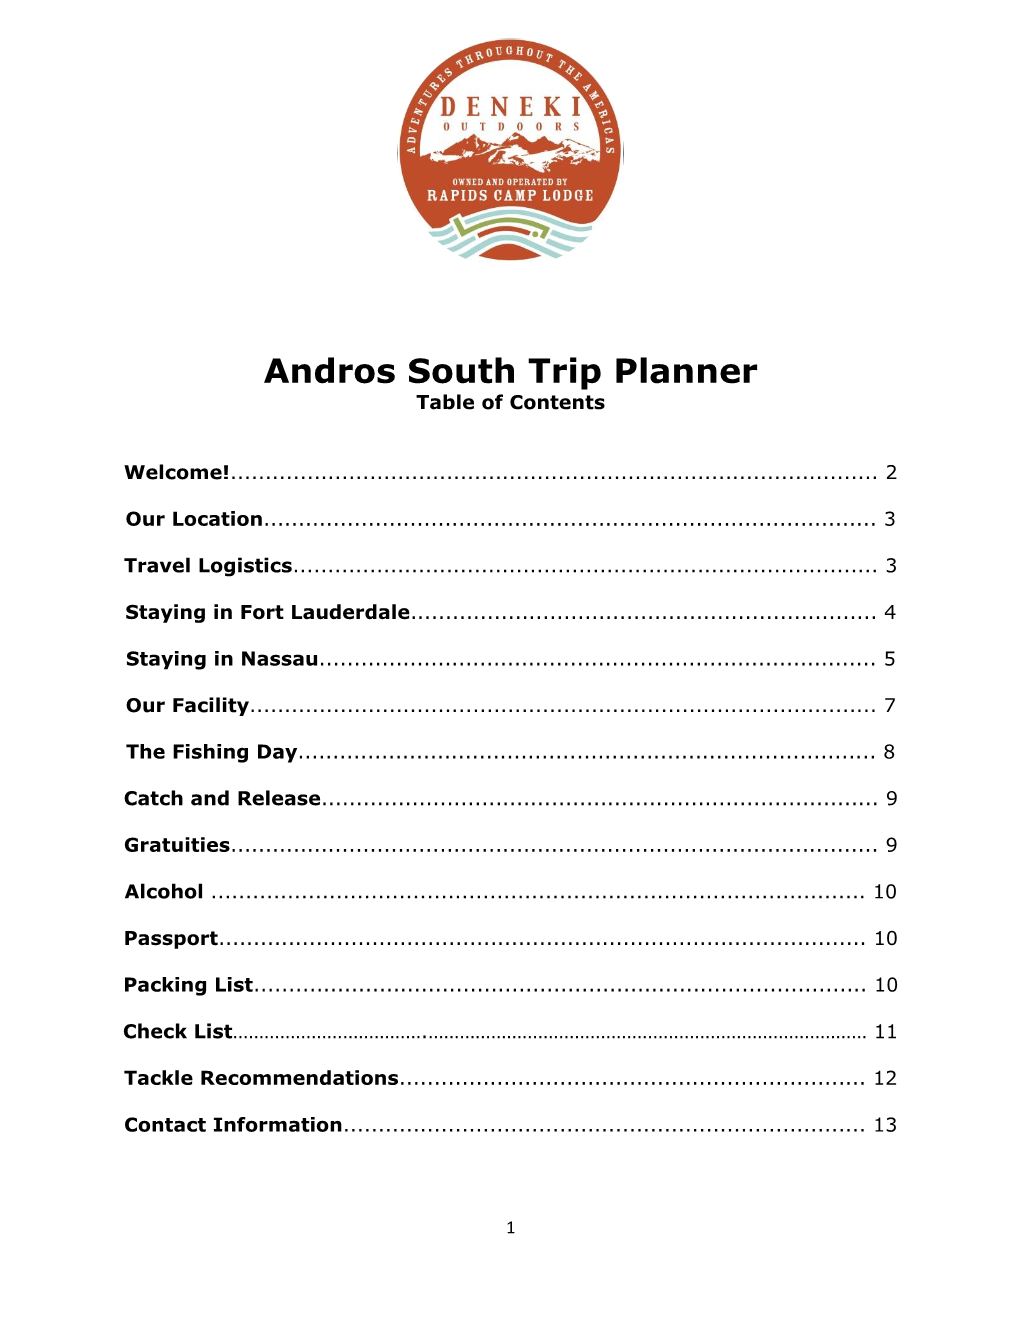 Andros South Trip Planner Table of Contents